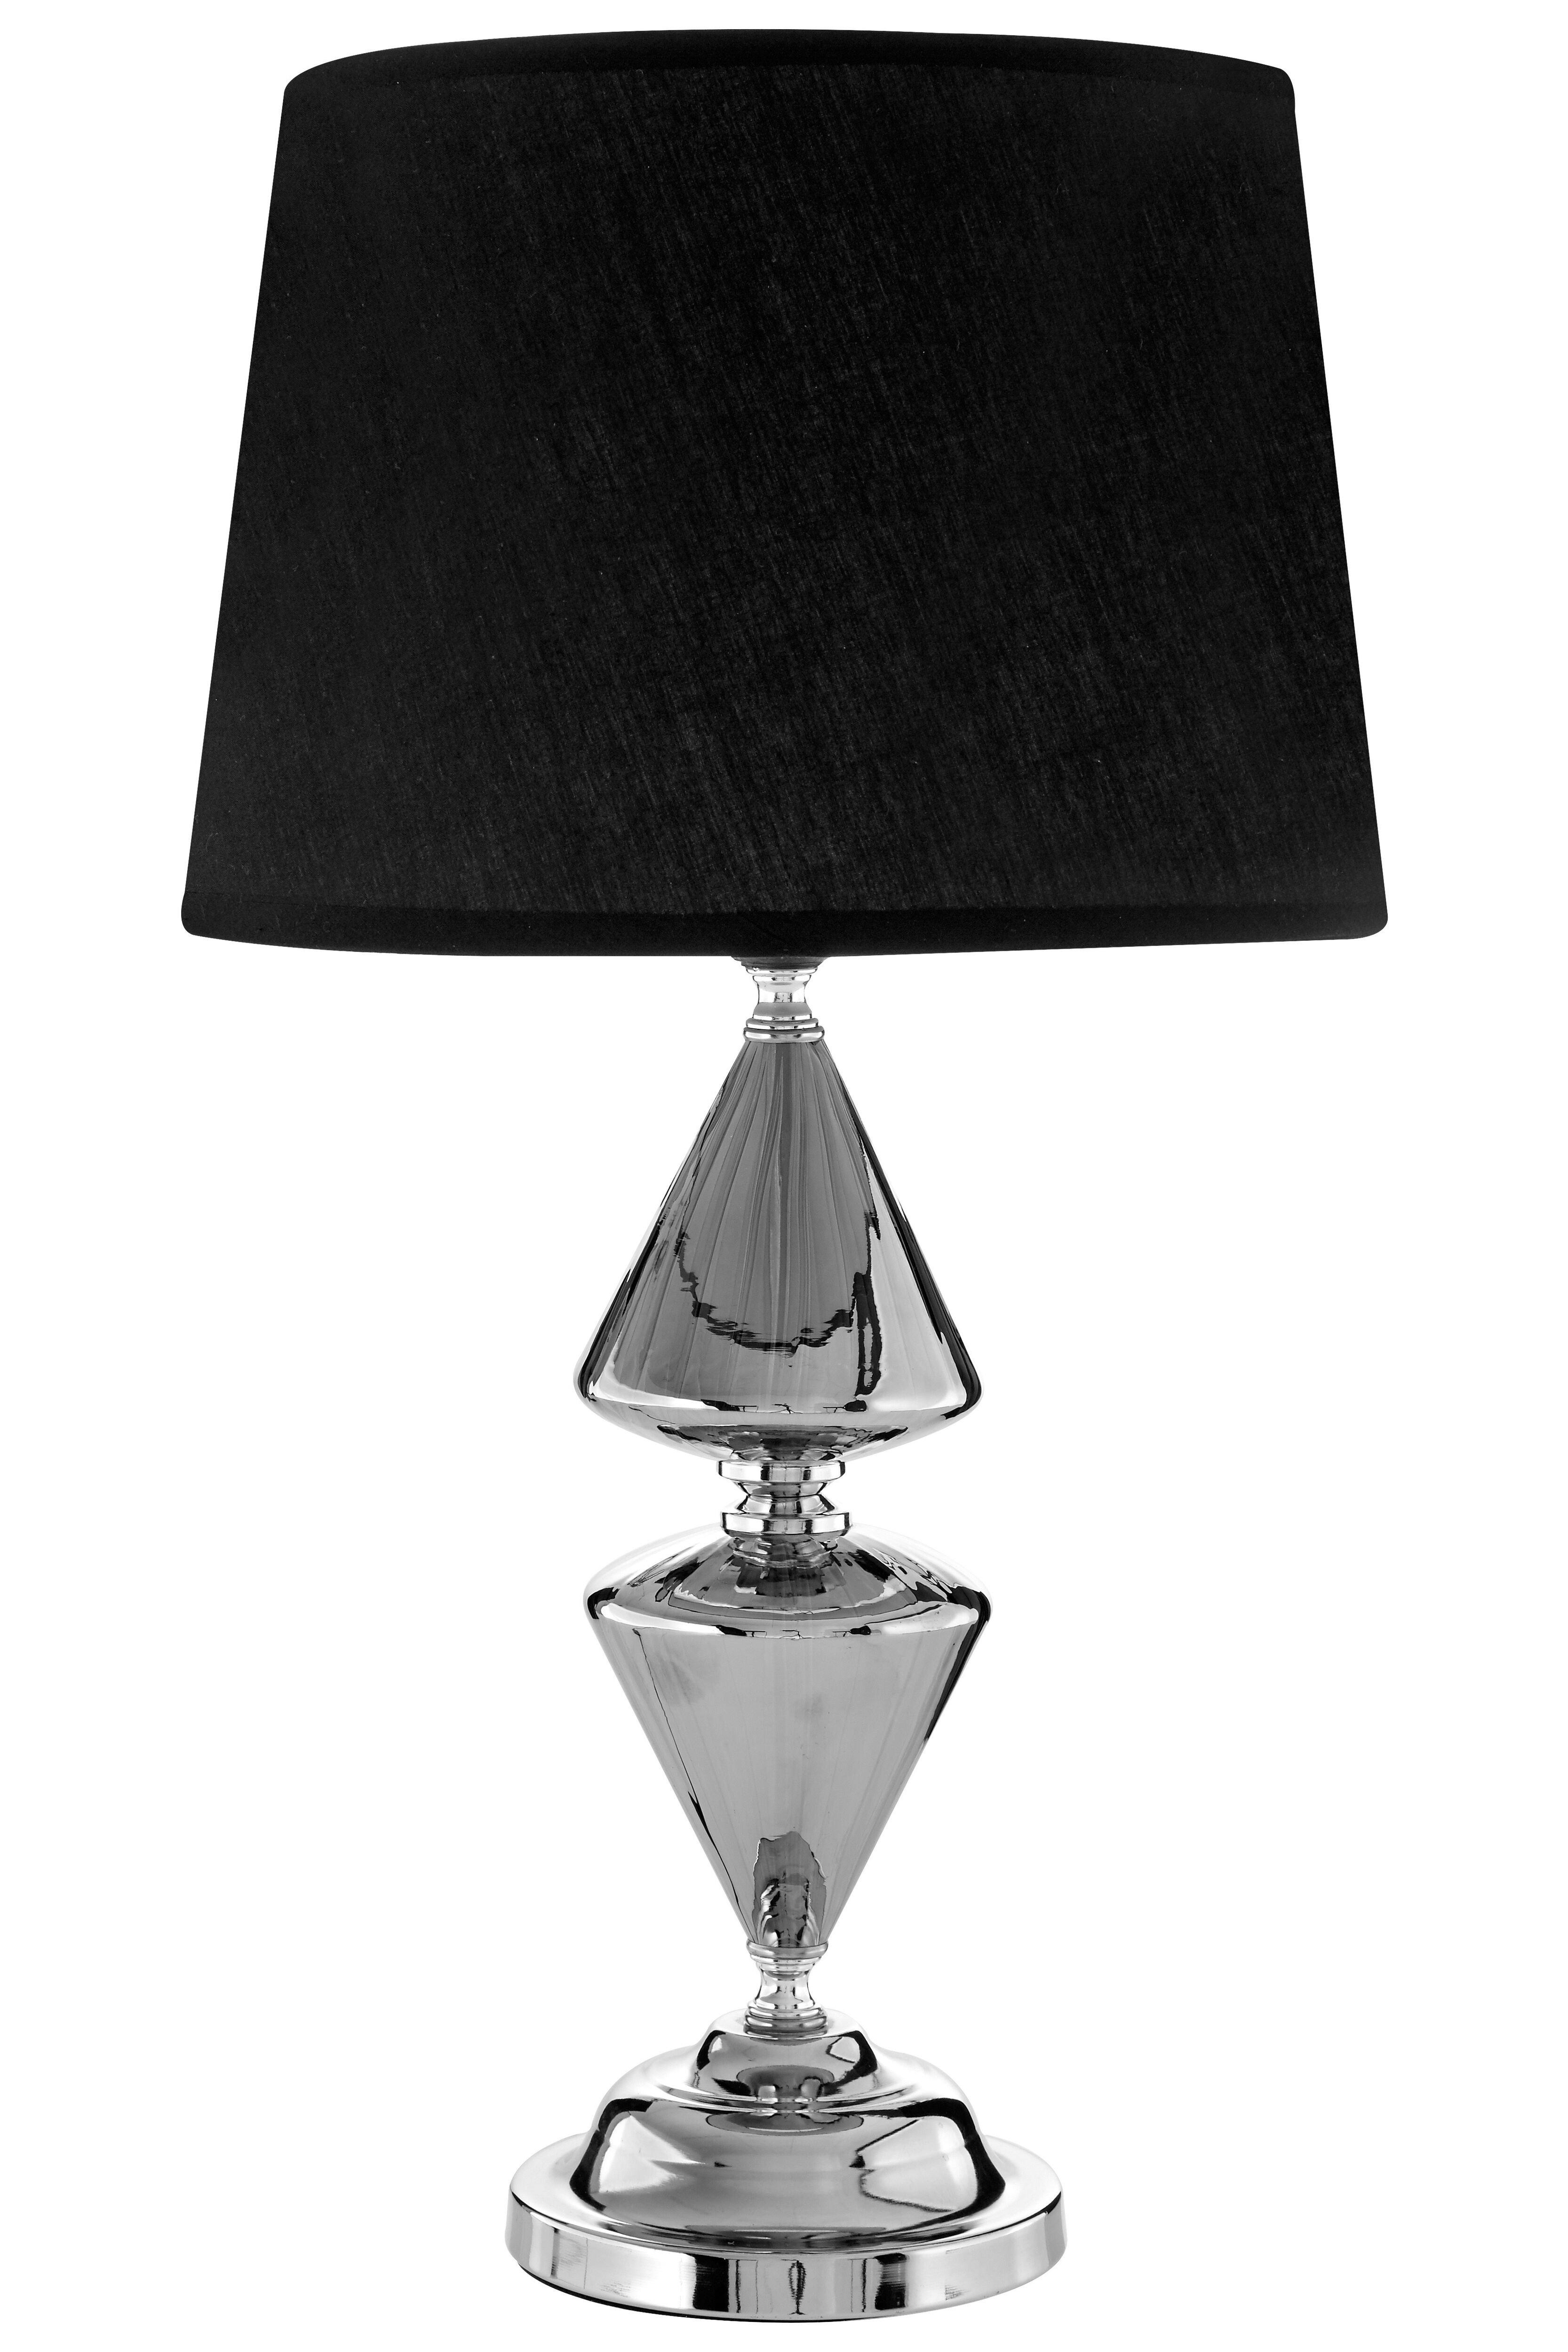 Interiors by Premier Honor Black Shade Table Lamp